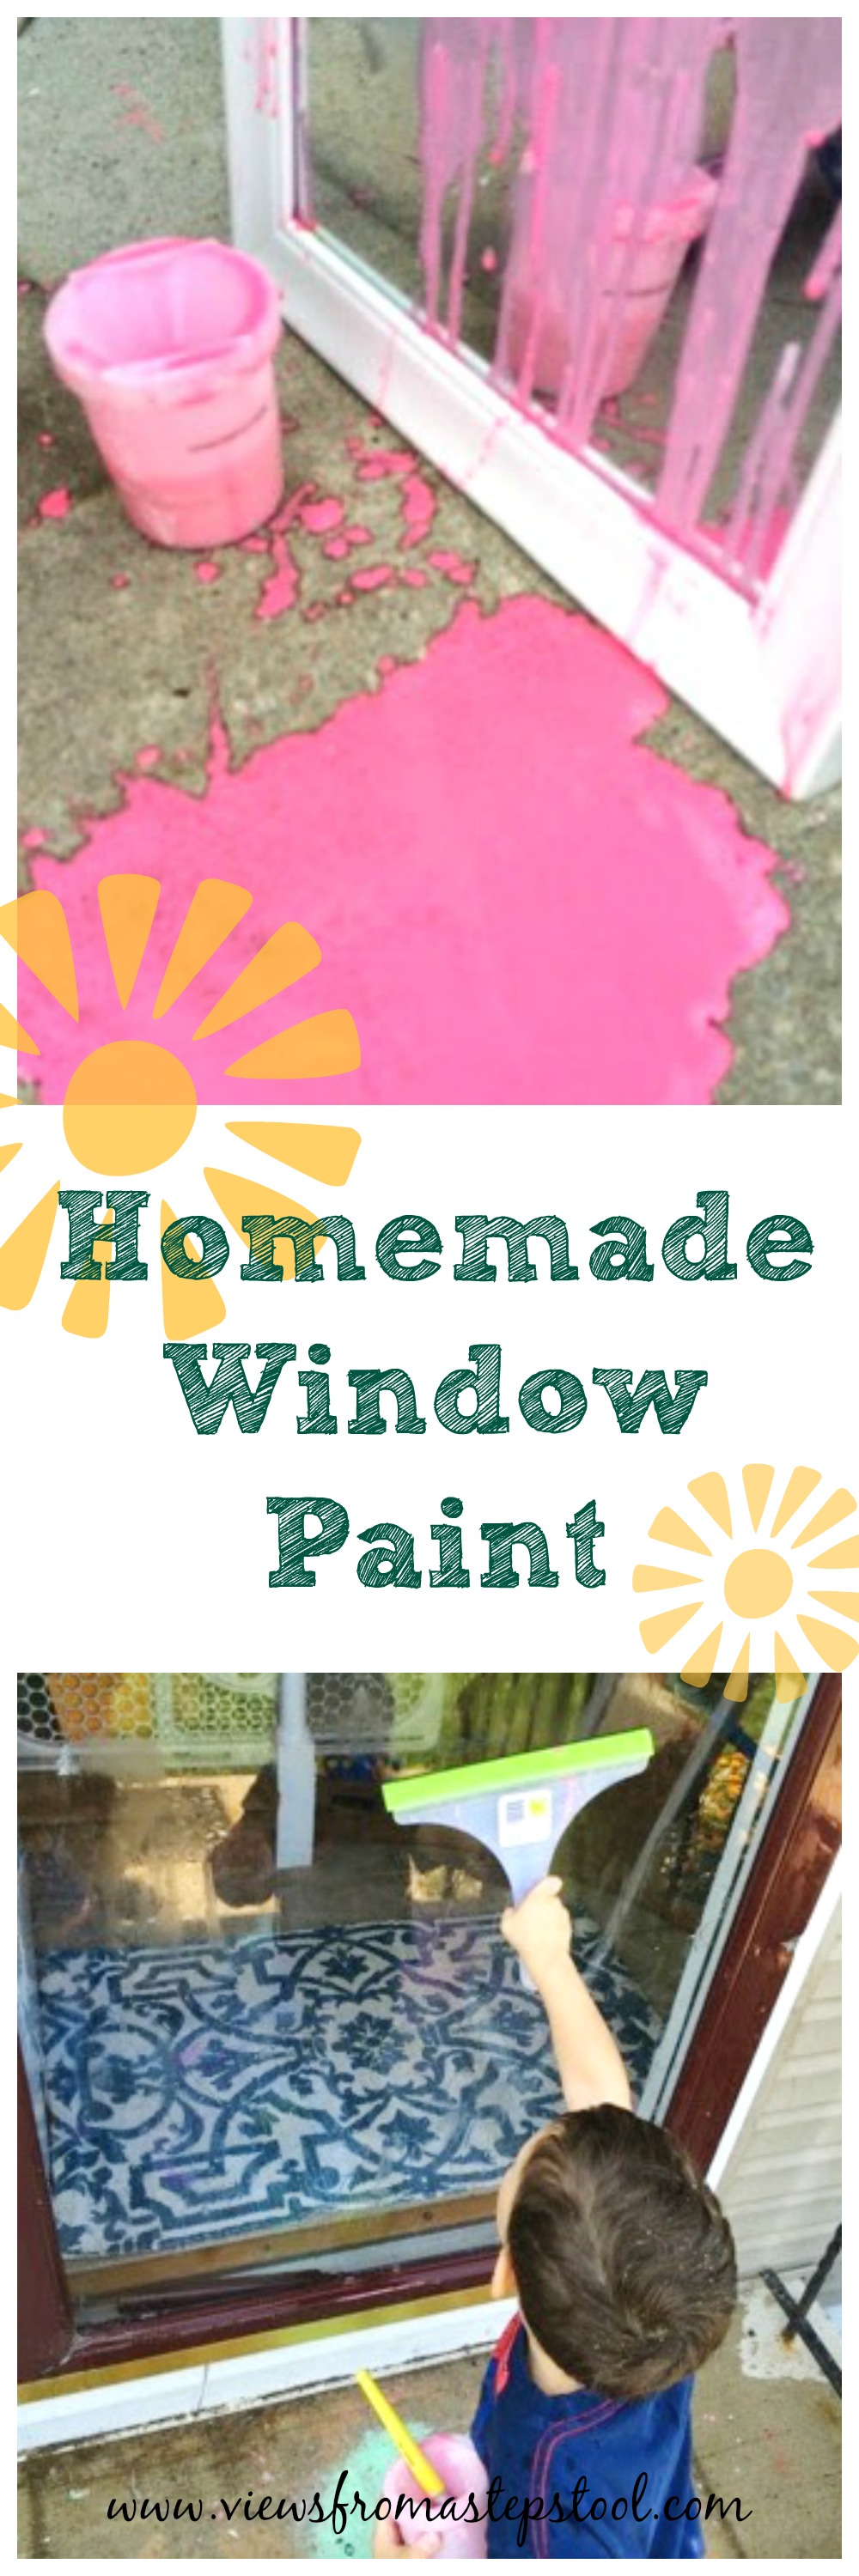 Make your own homemade window paint and take it outside! The will kids will love to make this recipe again and again. Paint and wash, paint and wash. Outdoor art is a great boredom buster and a great excuse to wash the windows!